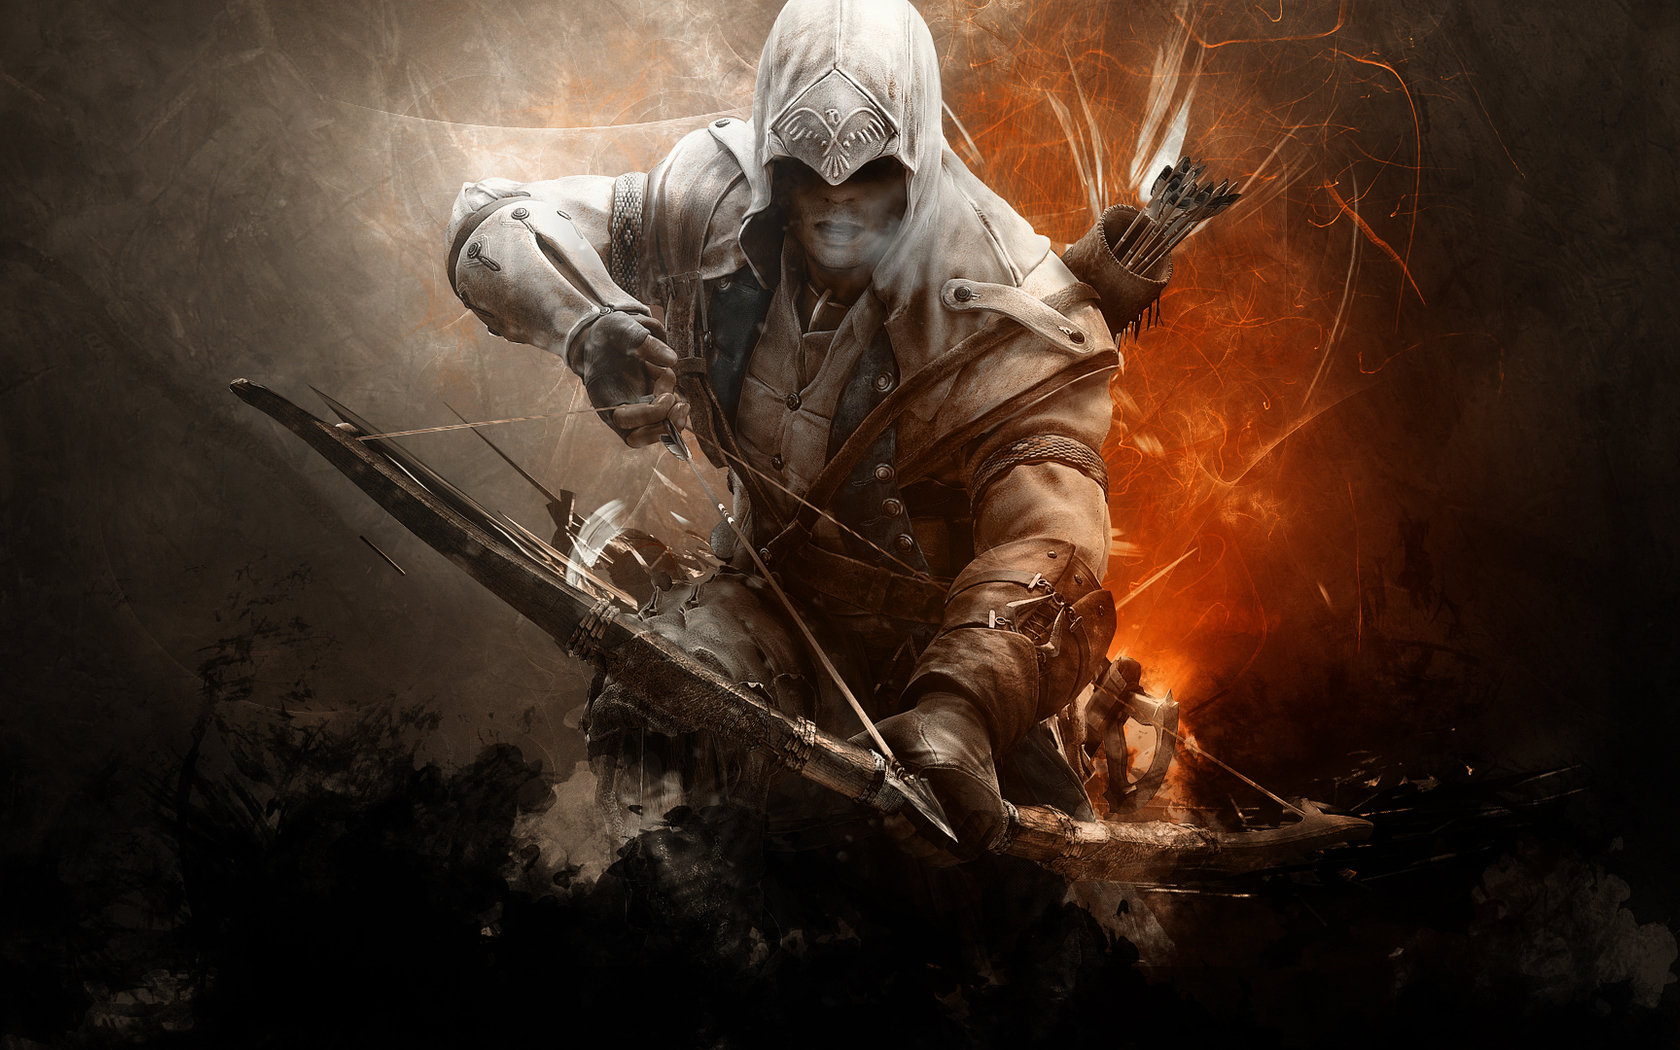 bow, warrior, arrow, assassin's creed, assassin's creed iii, video game High Definition image